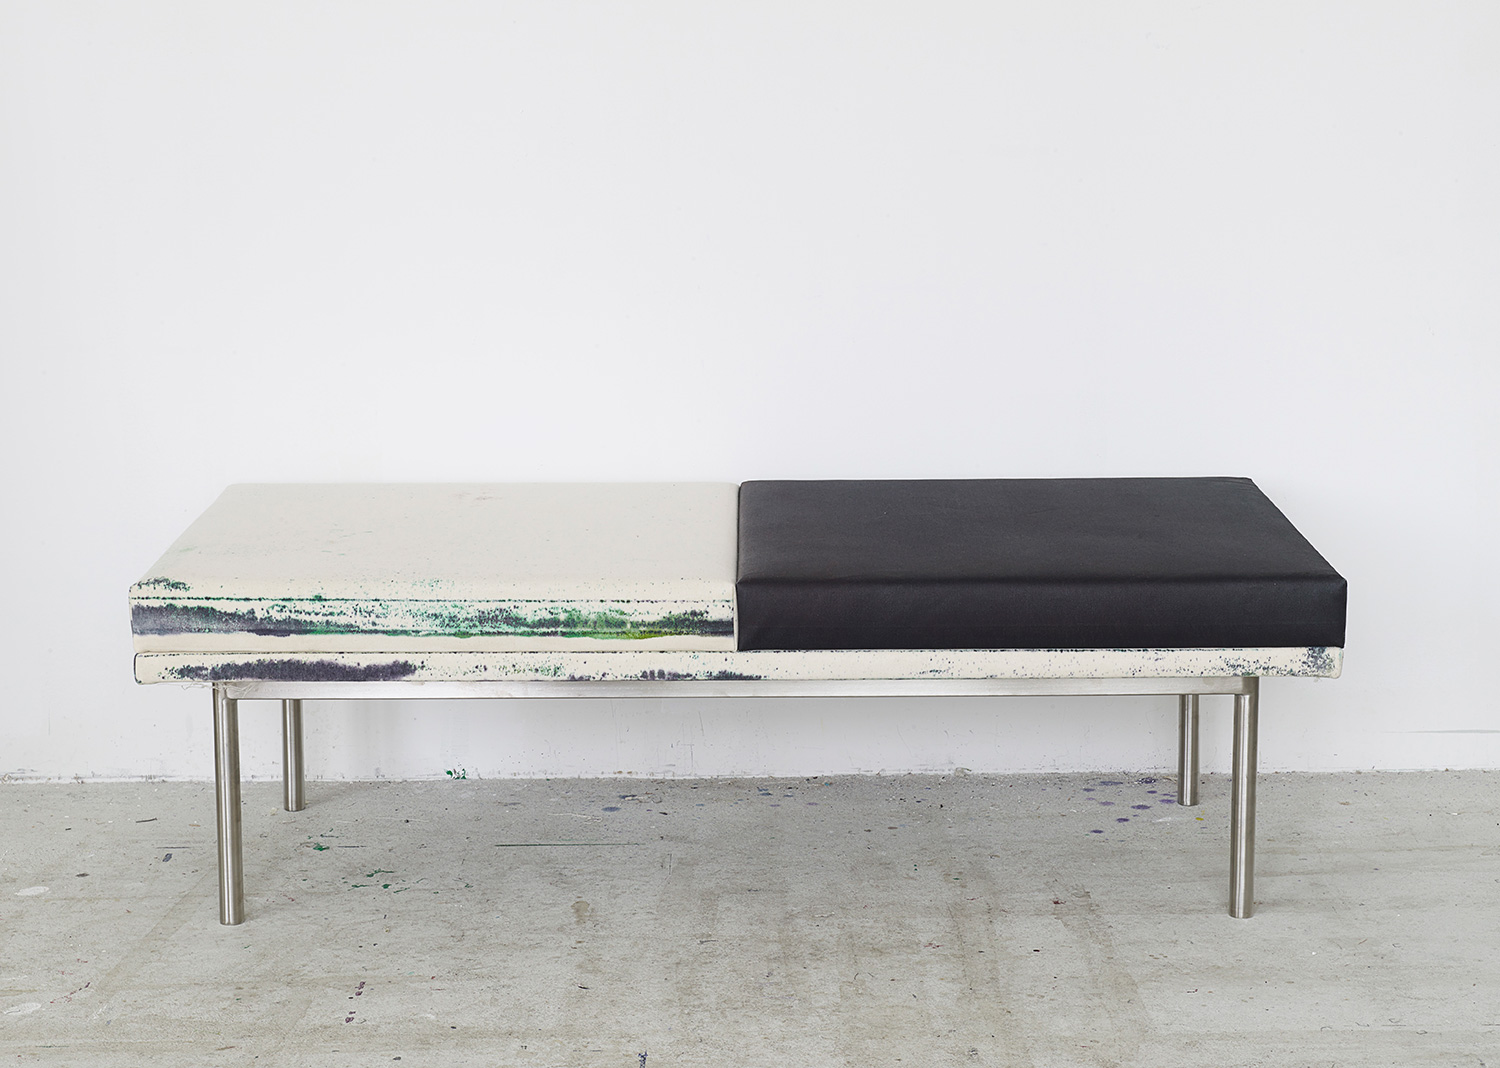  Waterhome museum bench (influence and influenza), 2013. 150 x 75 x 60 cm. oil on canvas, stainless steel frame, foam 